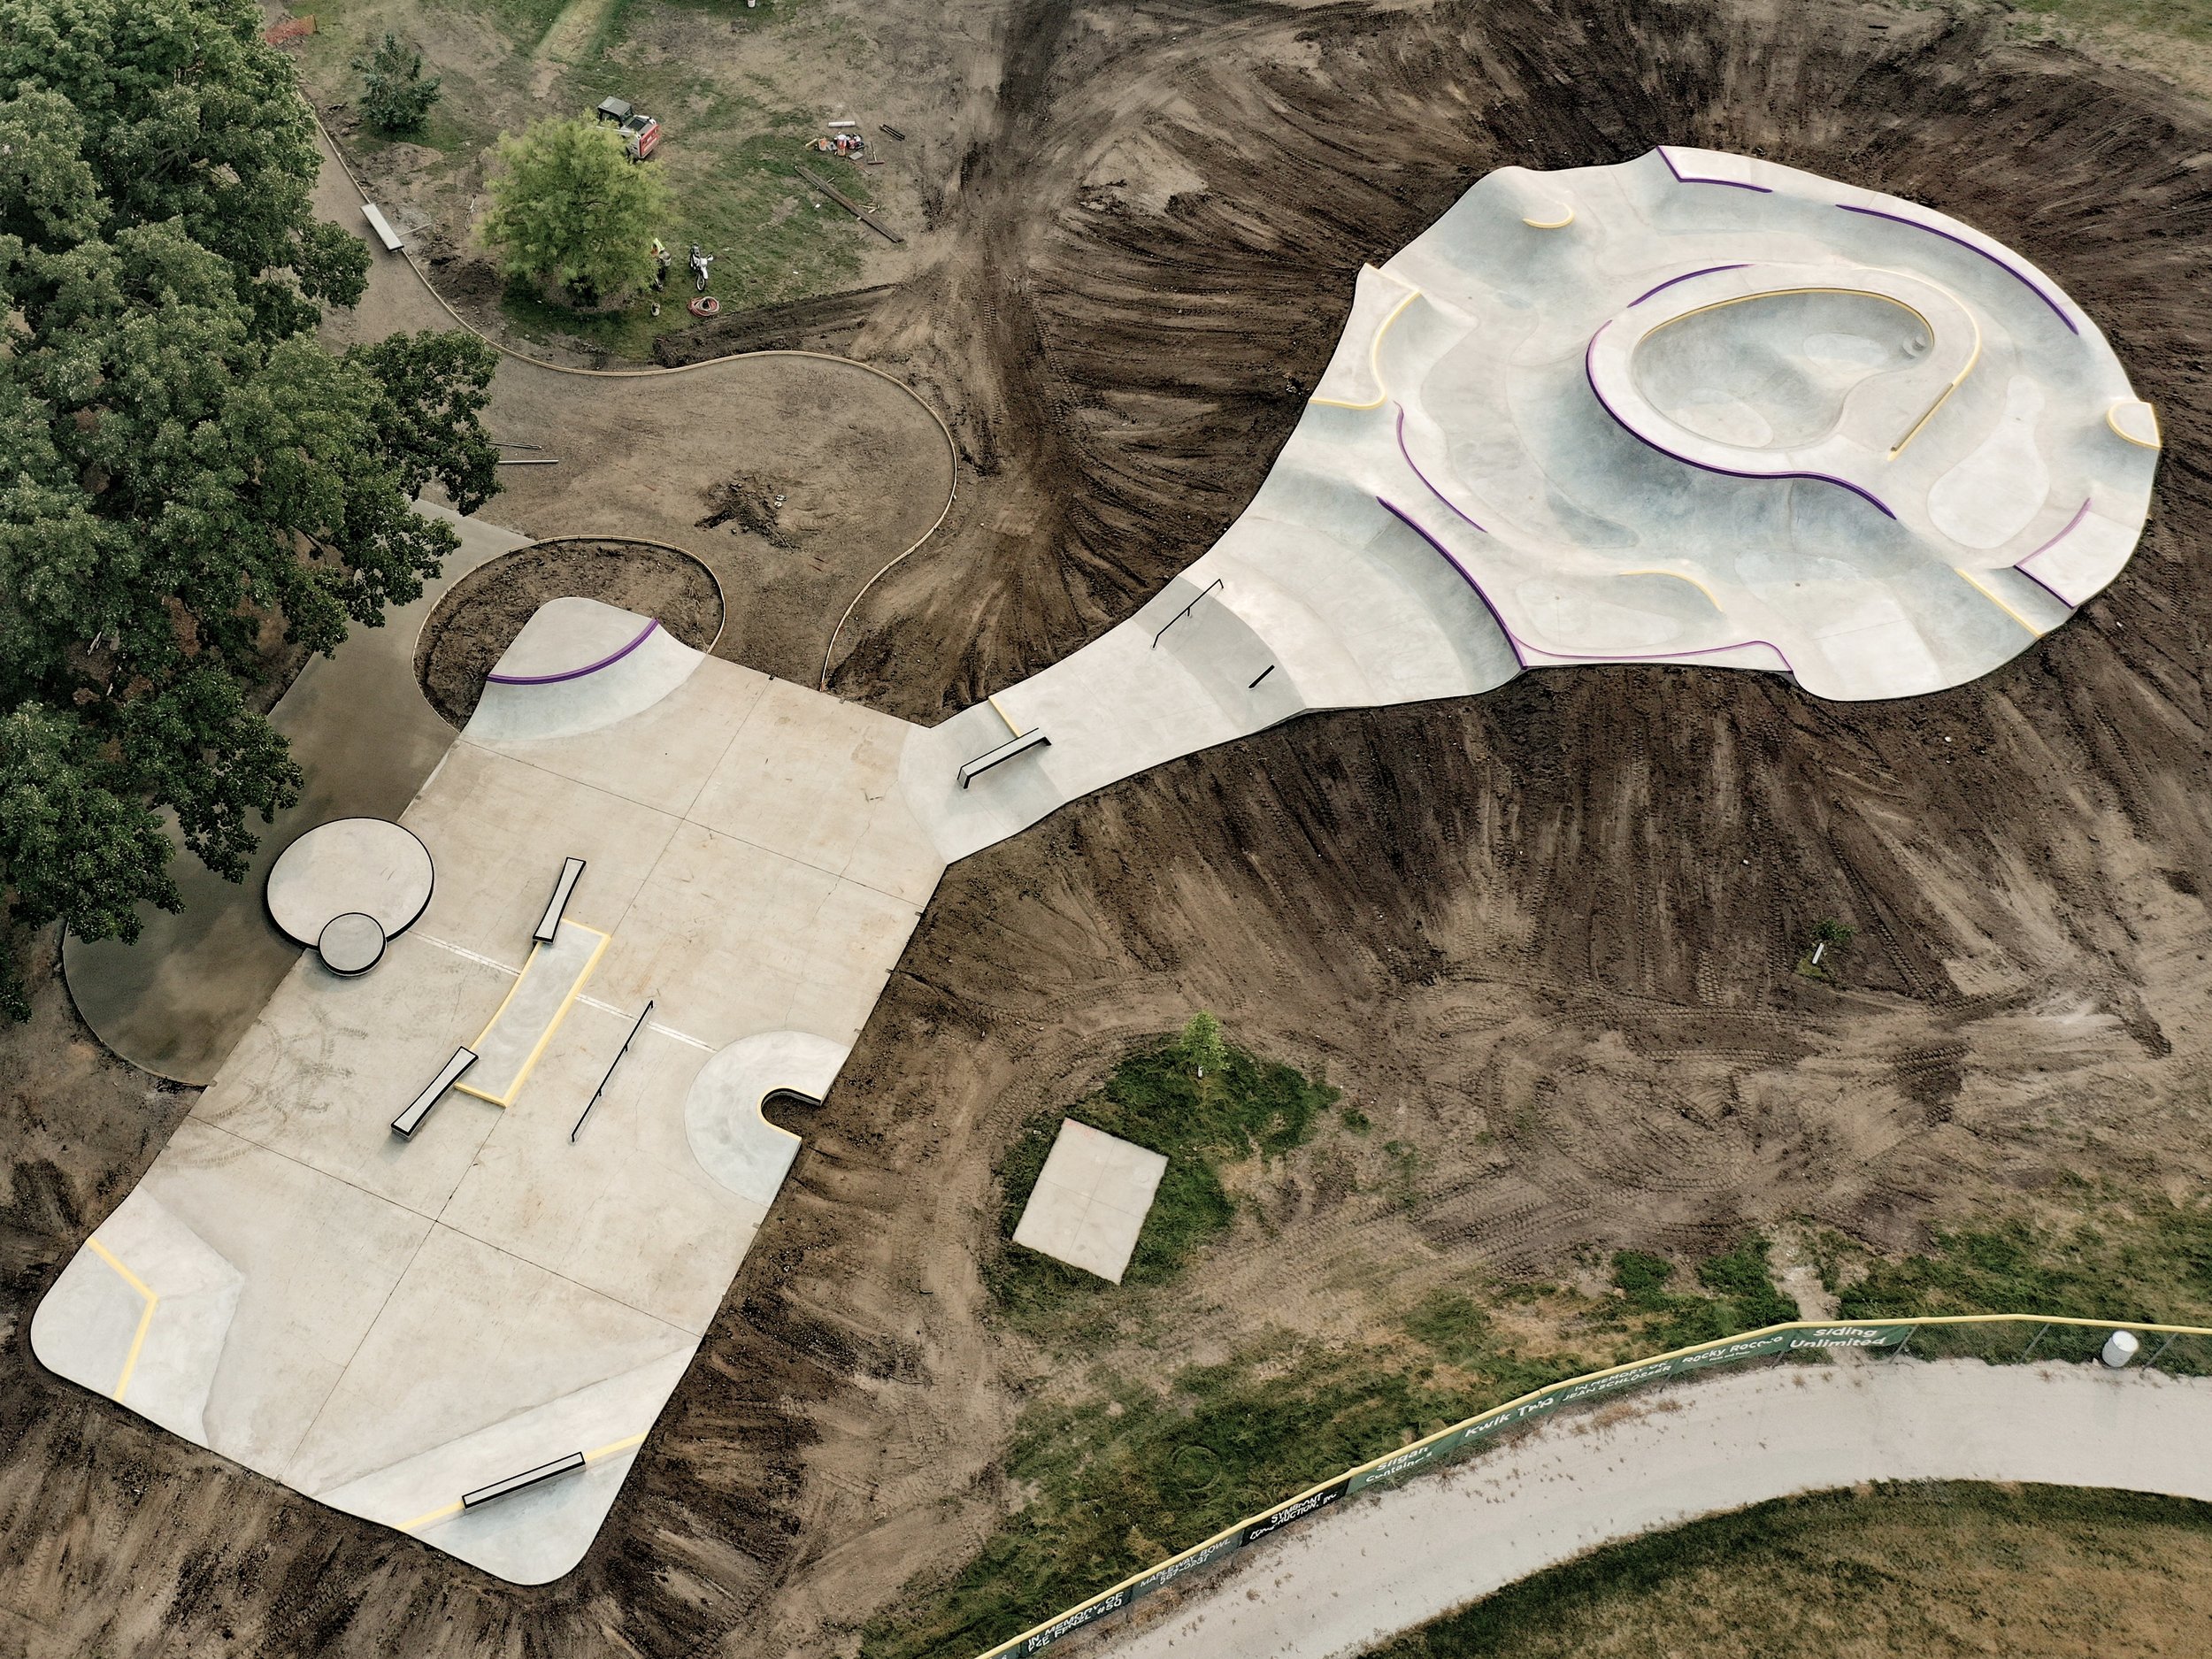 recycled existing slab makes the skatepark much larger